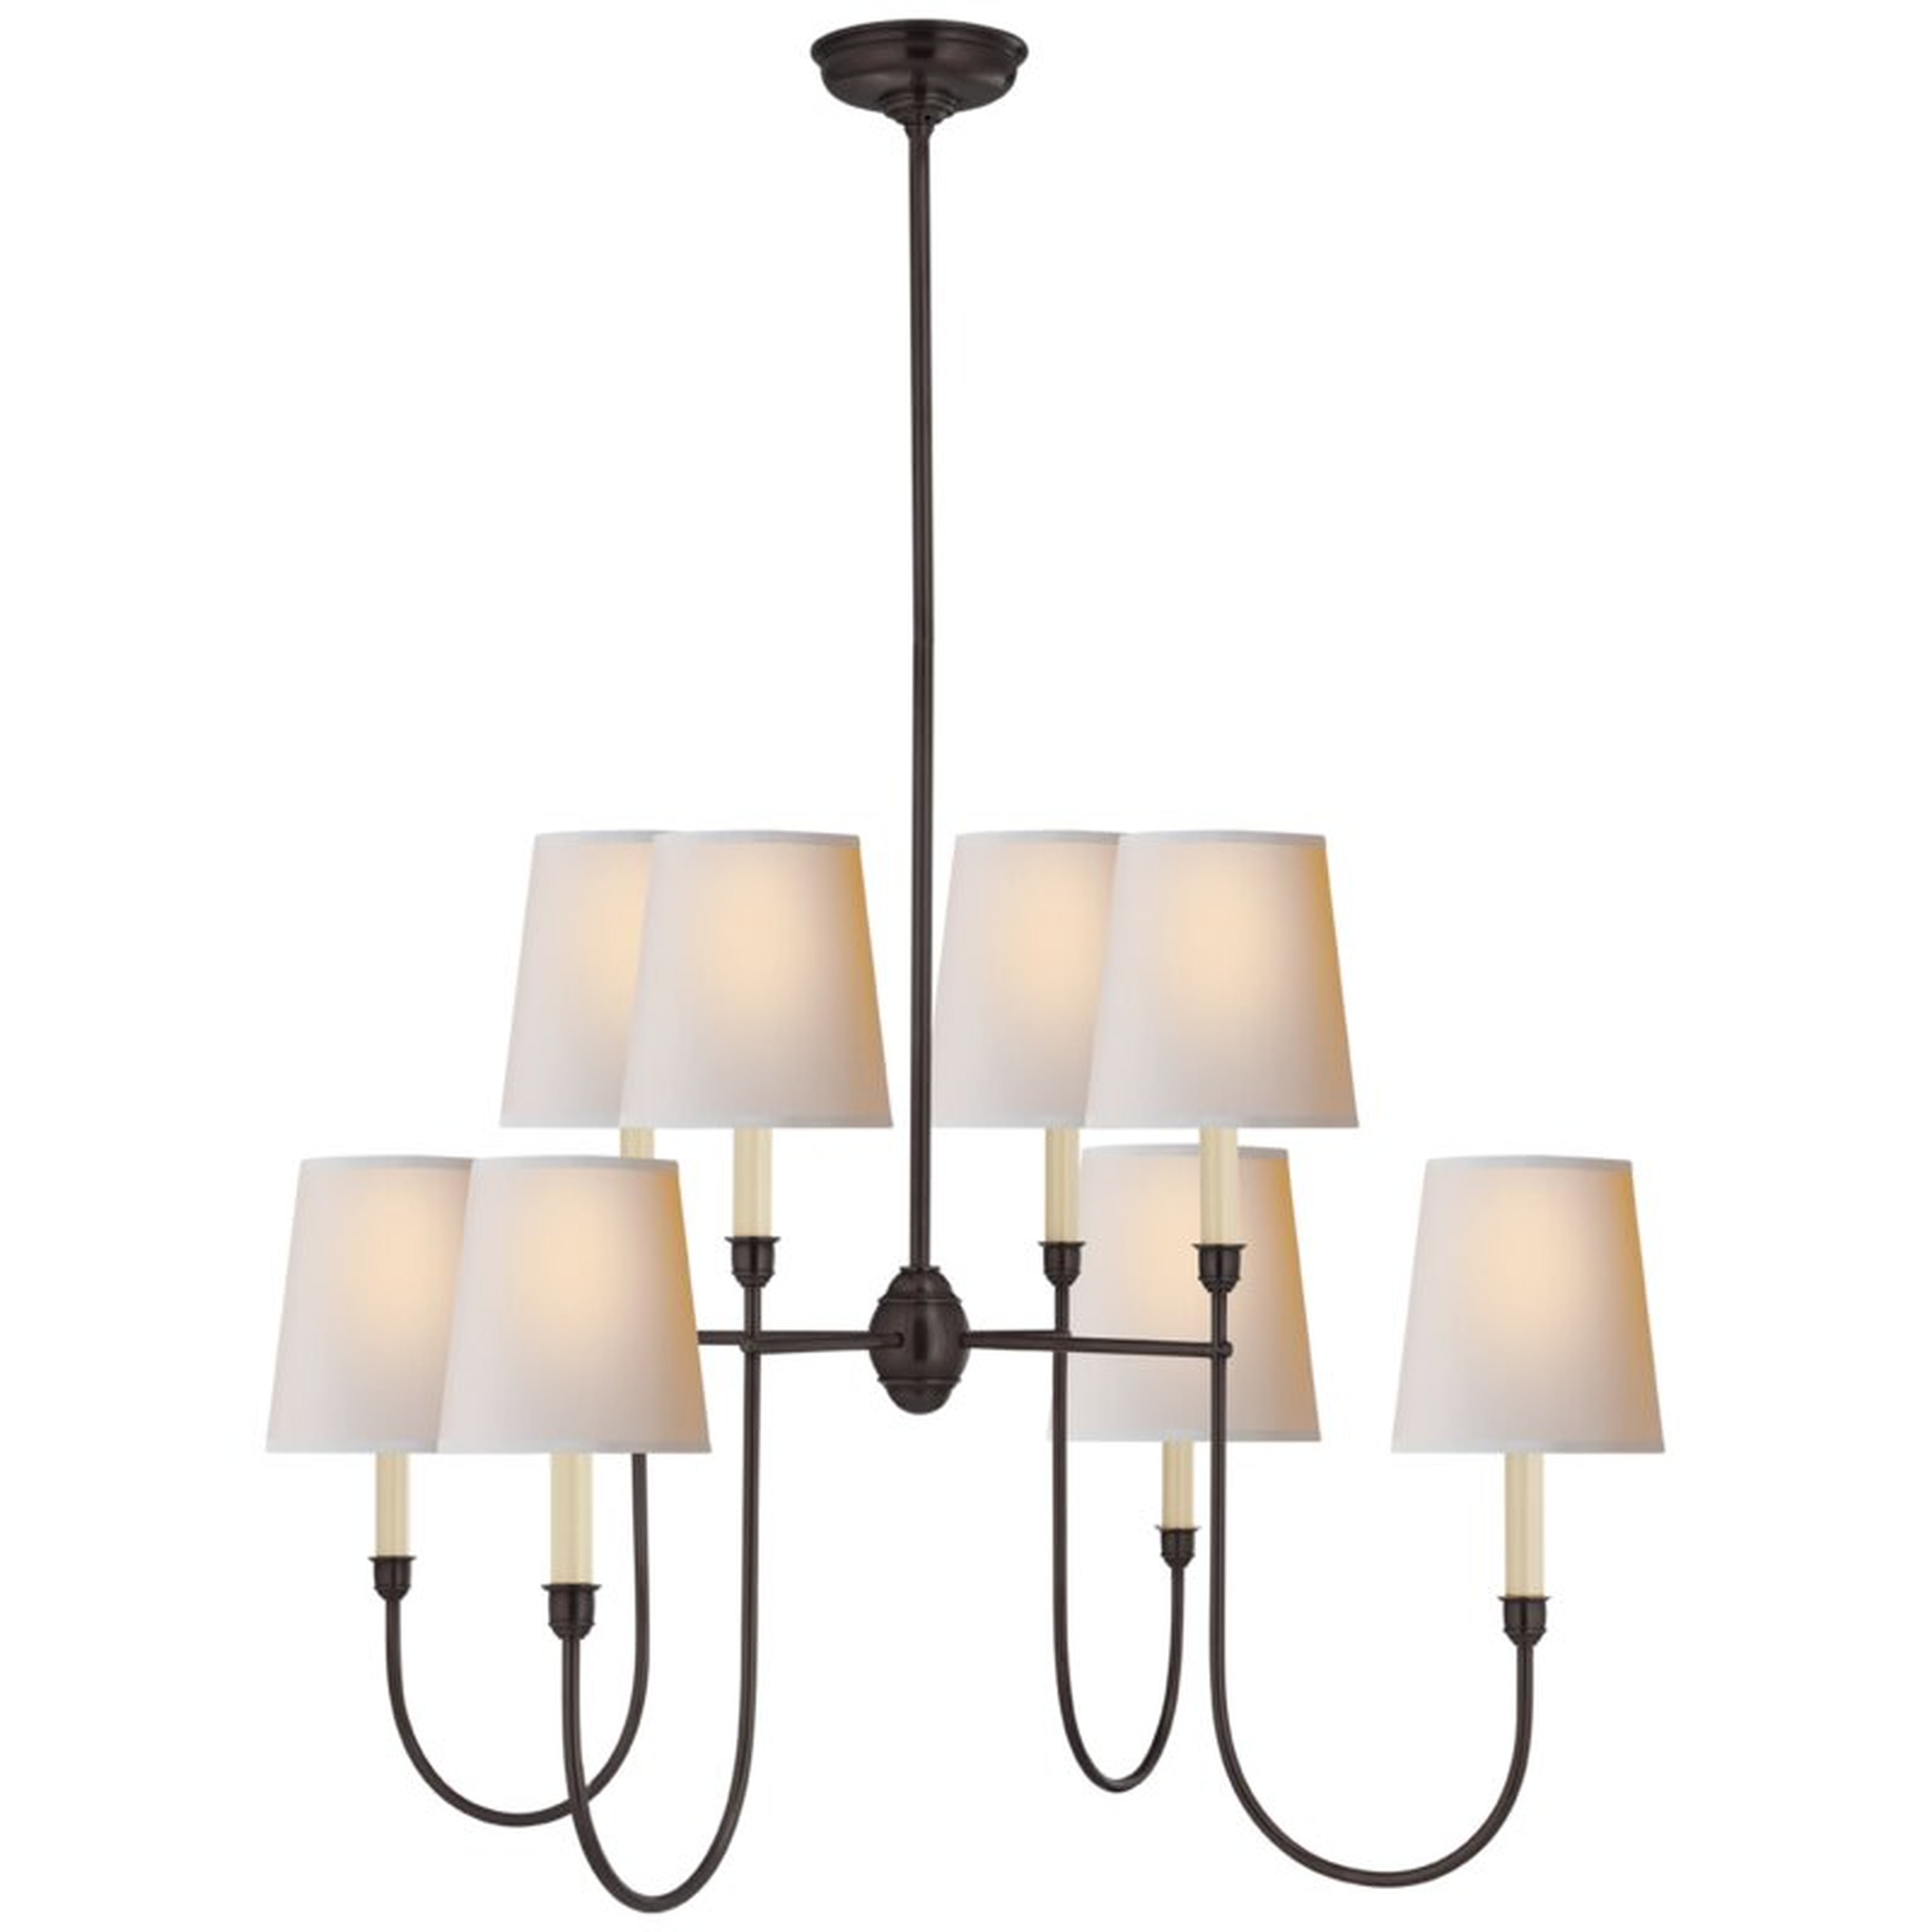 Visual Comfort Thomas O'brien 8 - Light Candle Style Tiered Chandelier Finish: Bronze - Perigold